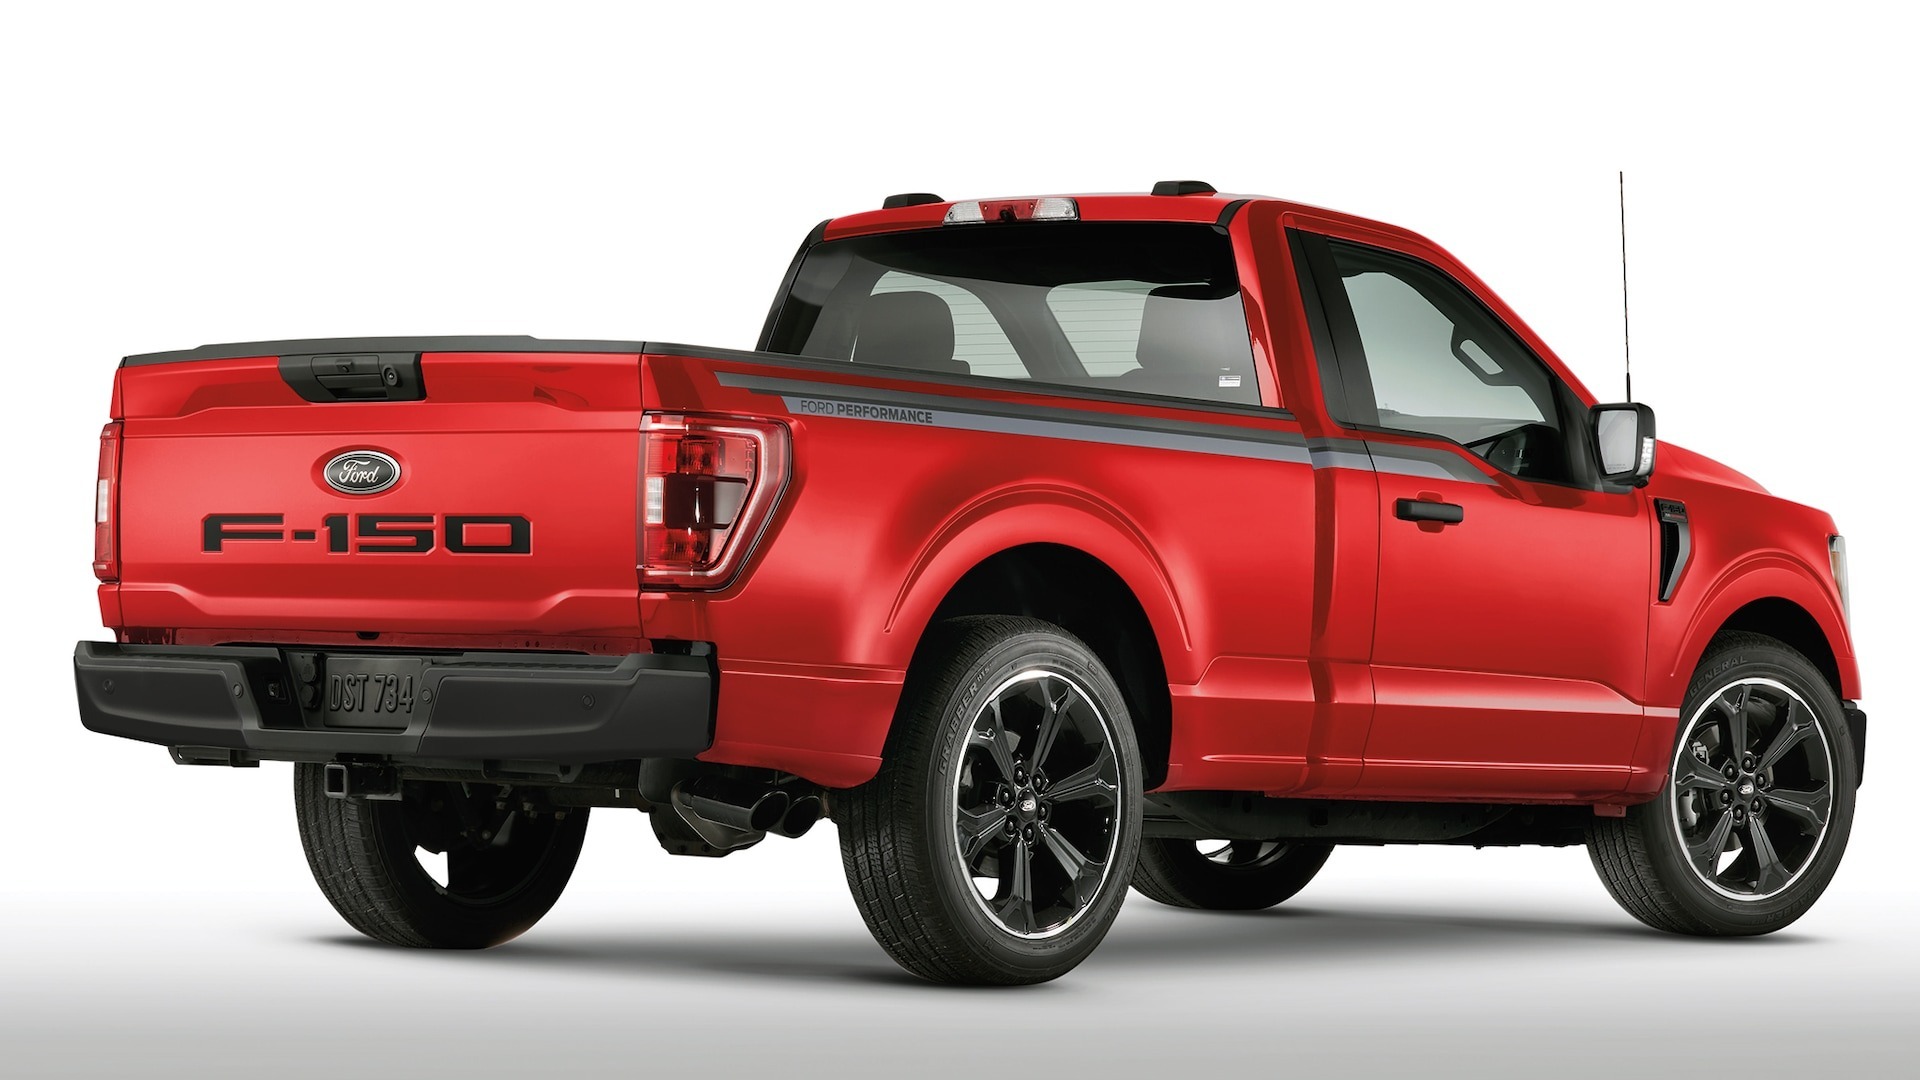 Ford Will Debut a Lowered Street F150 Pickup Report The Drive